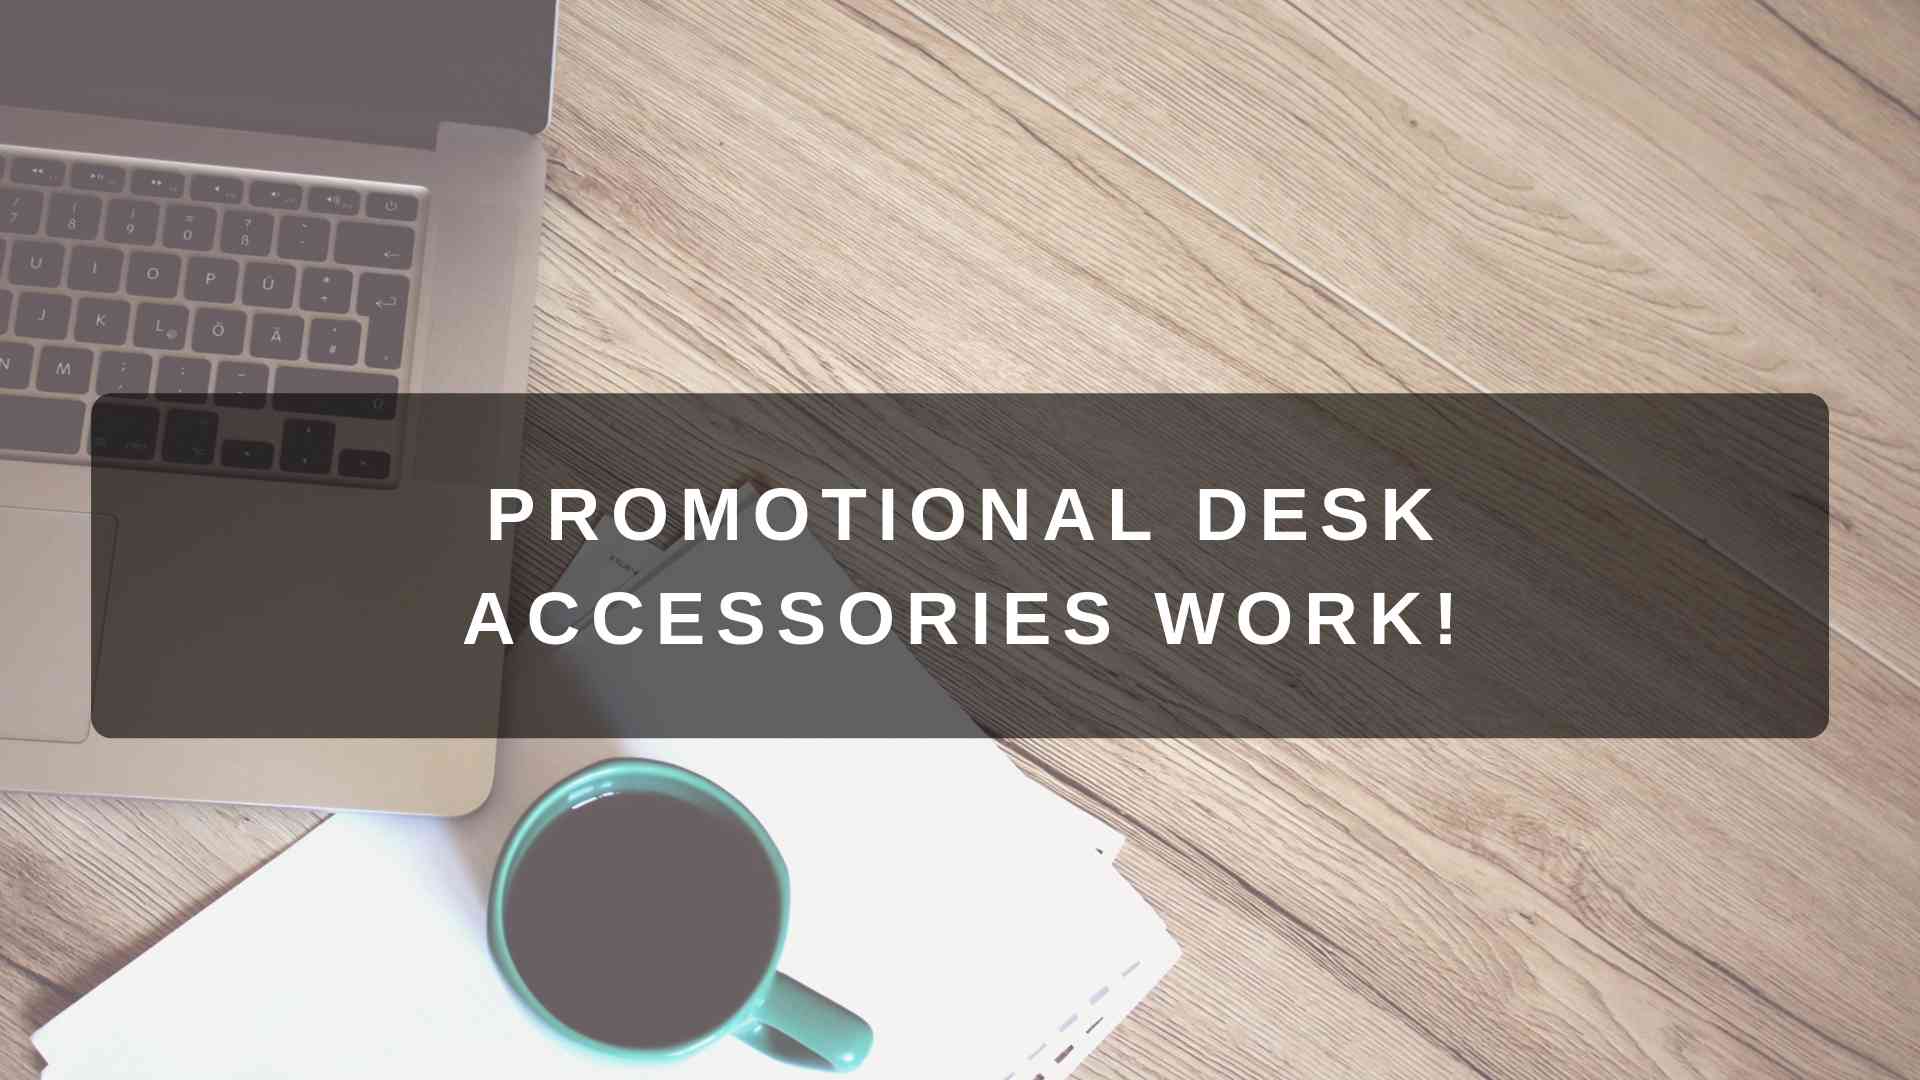 Promotional Desk Accessories Work Video Greco Promotions